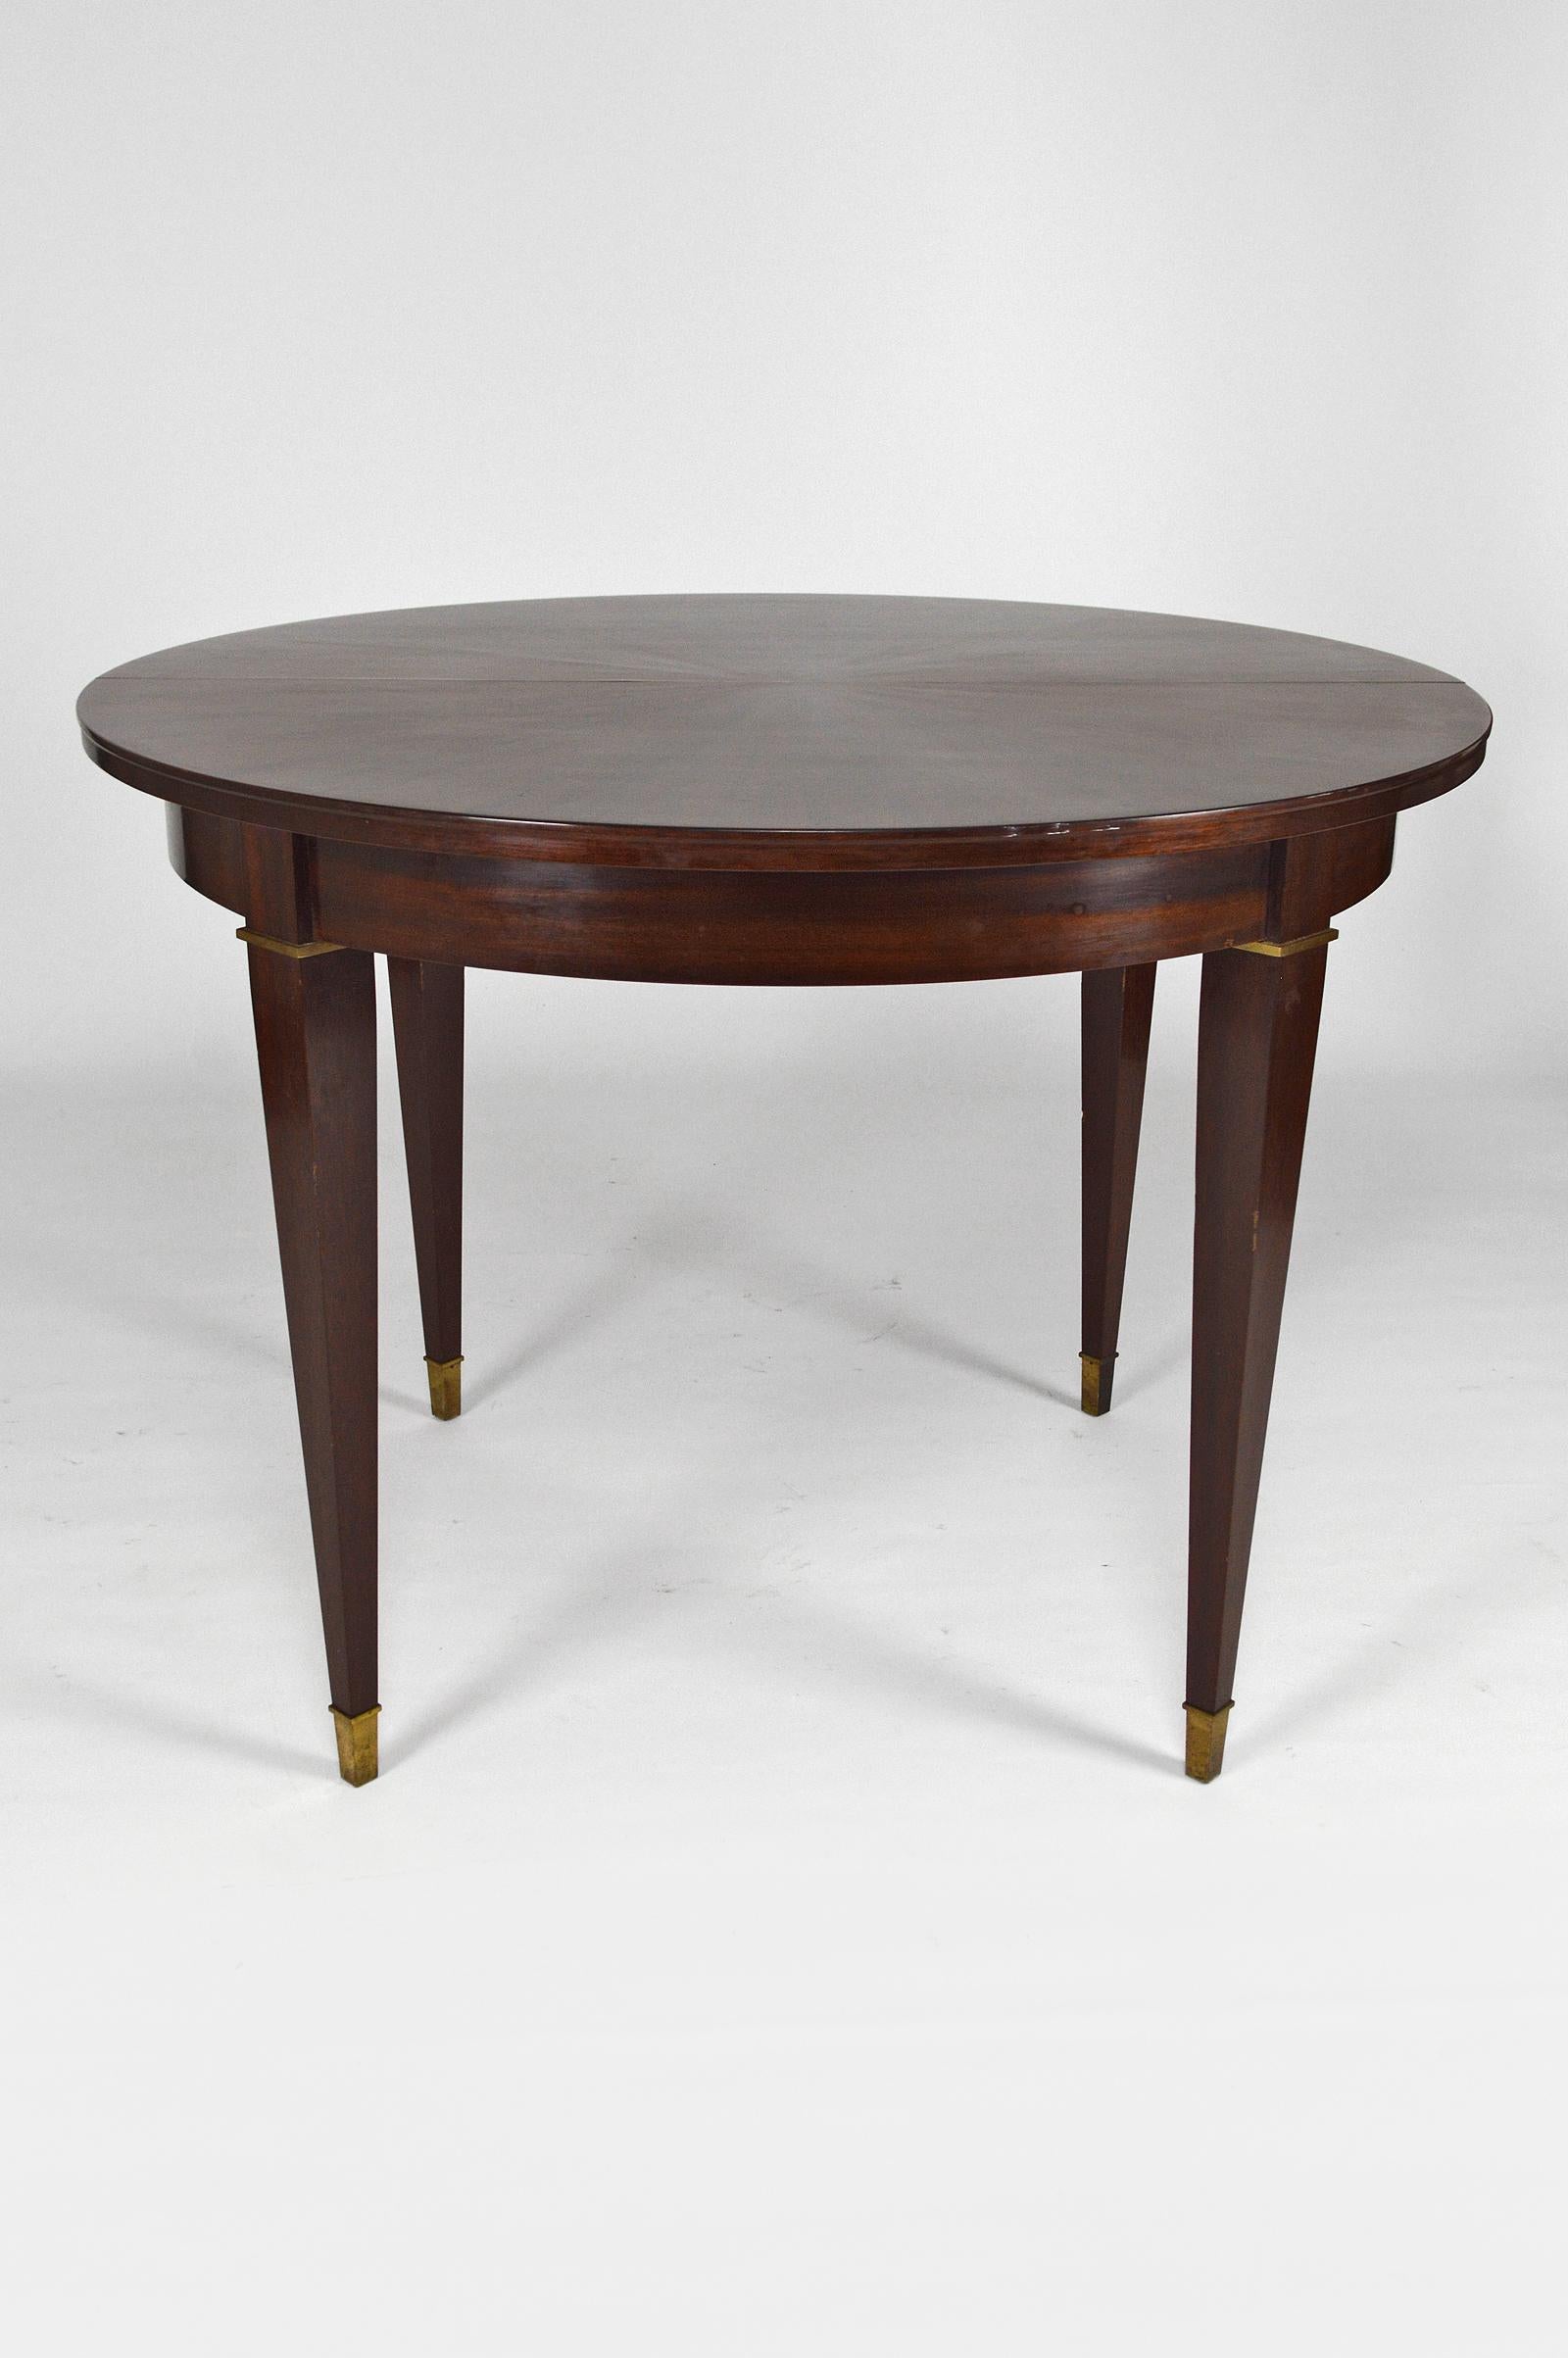 Extendable round dining table in mahogany.

Solid and veneered mahogany.
The table top is veneered with mahogany and has a 